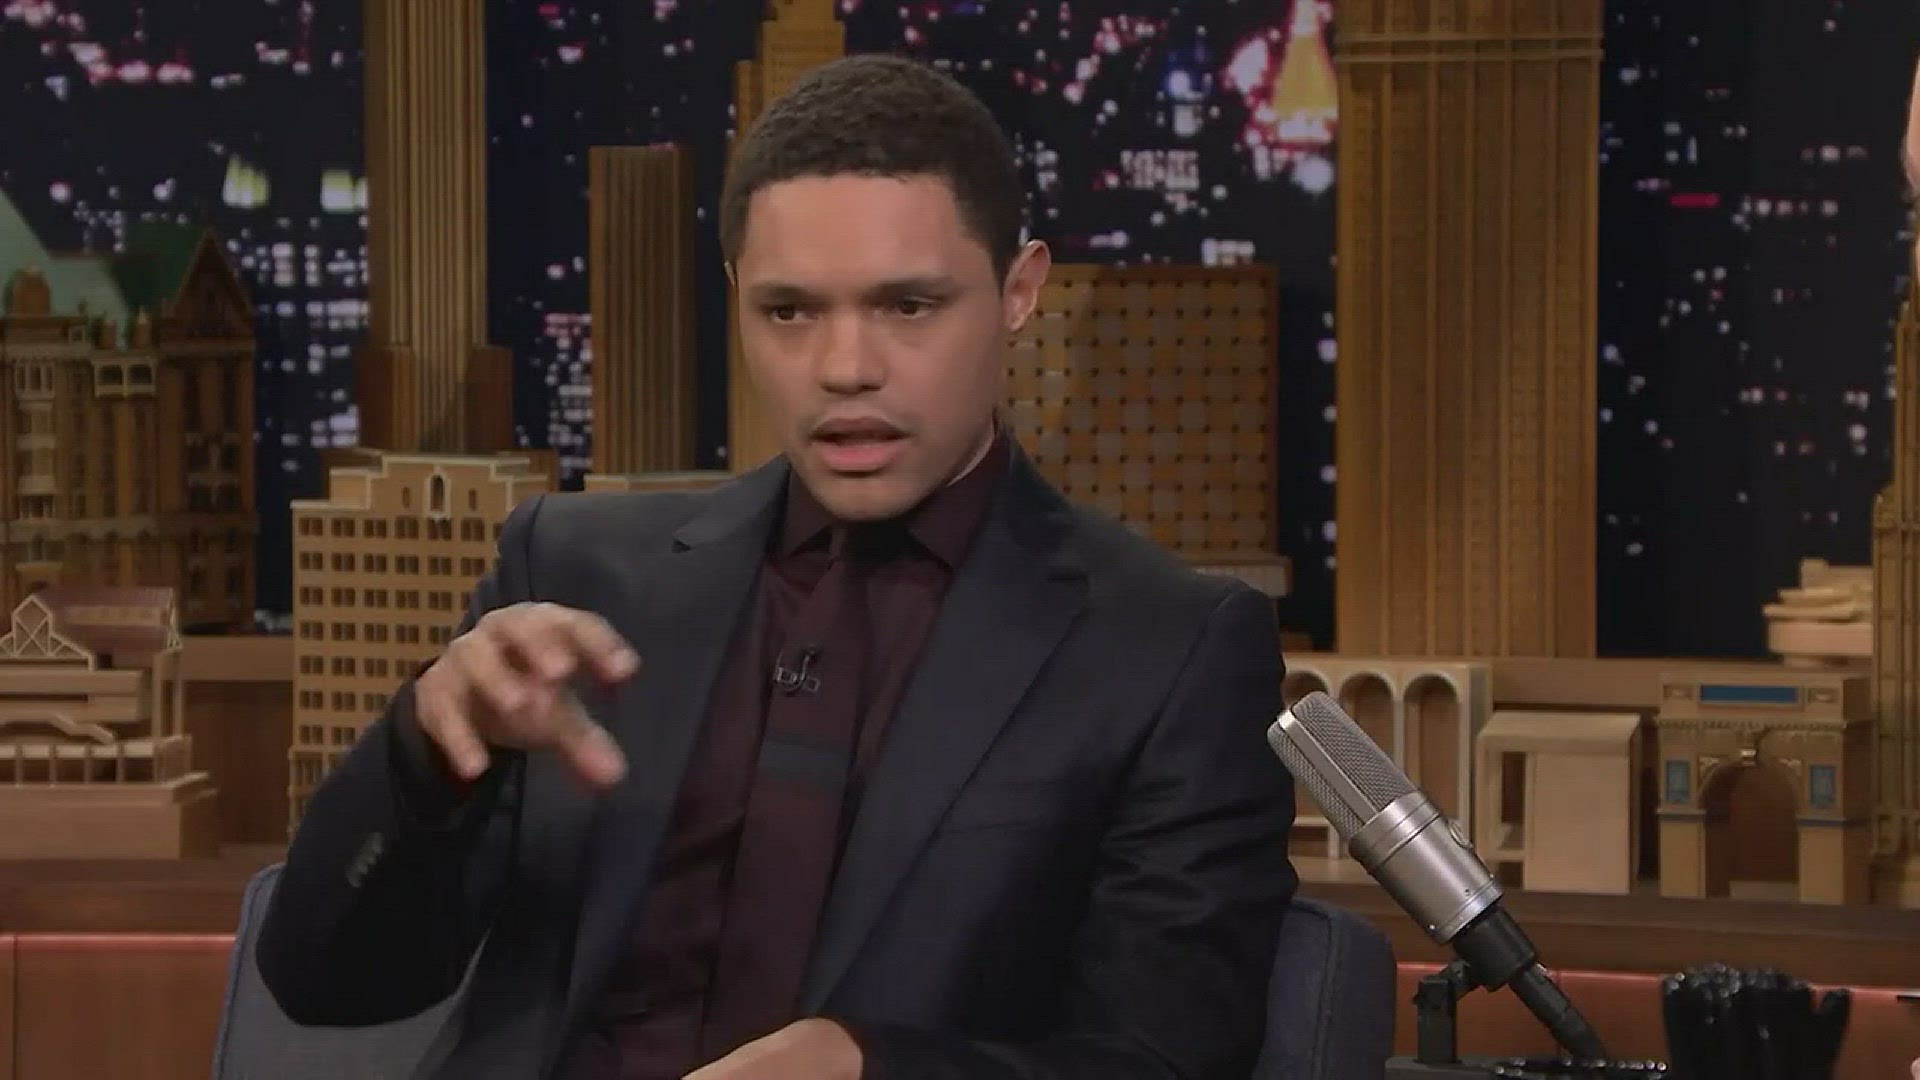 Trevor Noah shouts out Cleveland on NBC's The Tonight Show Starring Jimmy Fallon